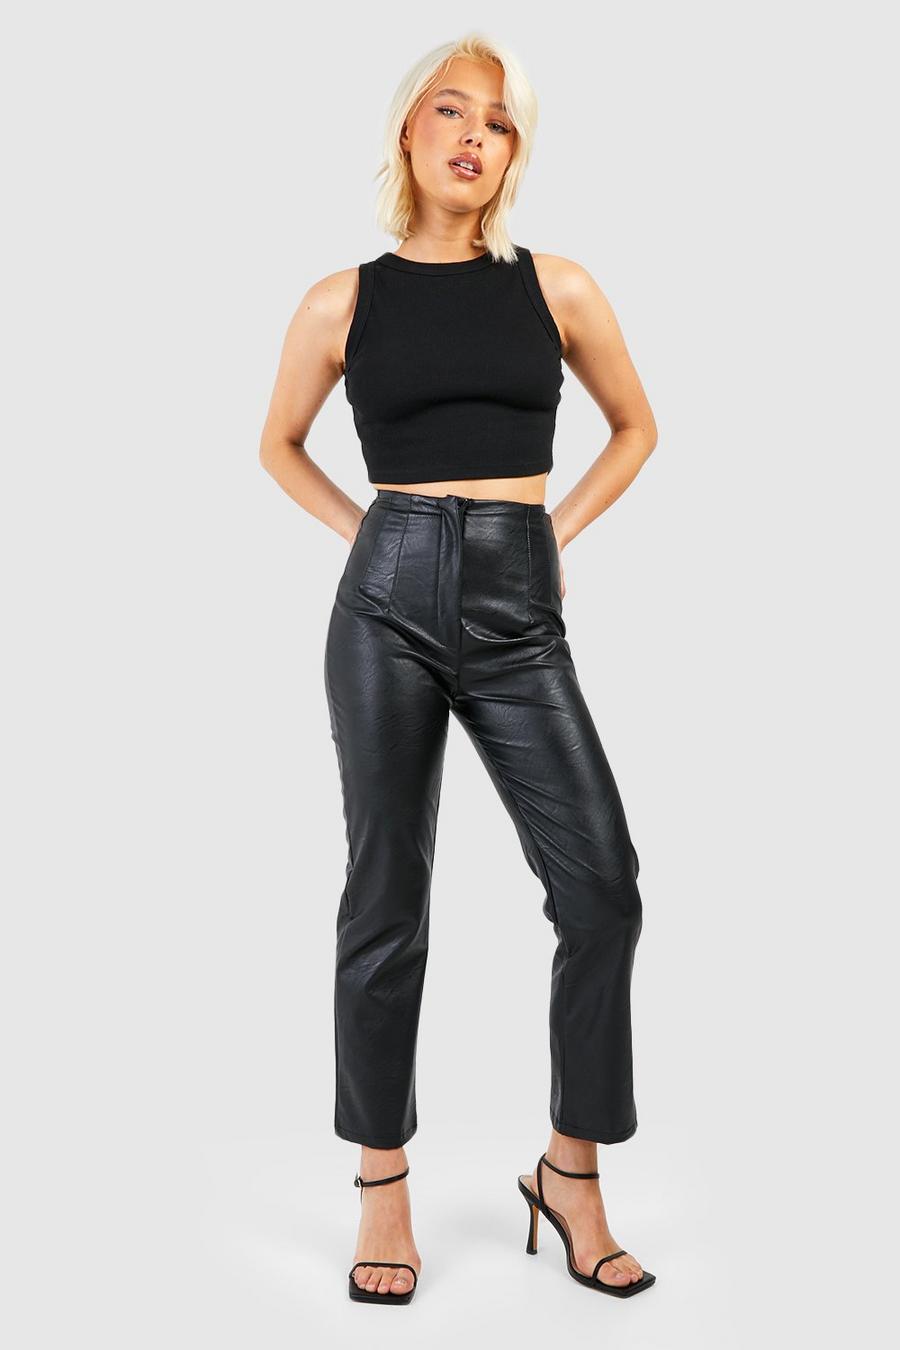 Black Leather Look High Waisted Tailored Skinny Pants